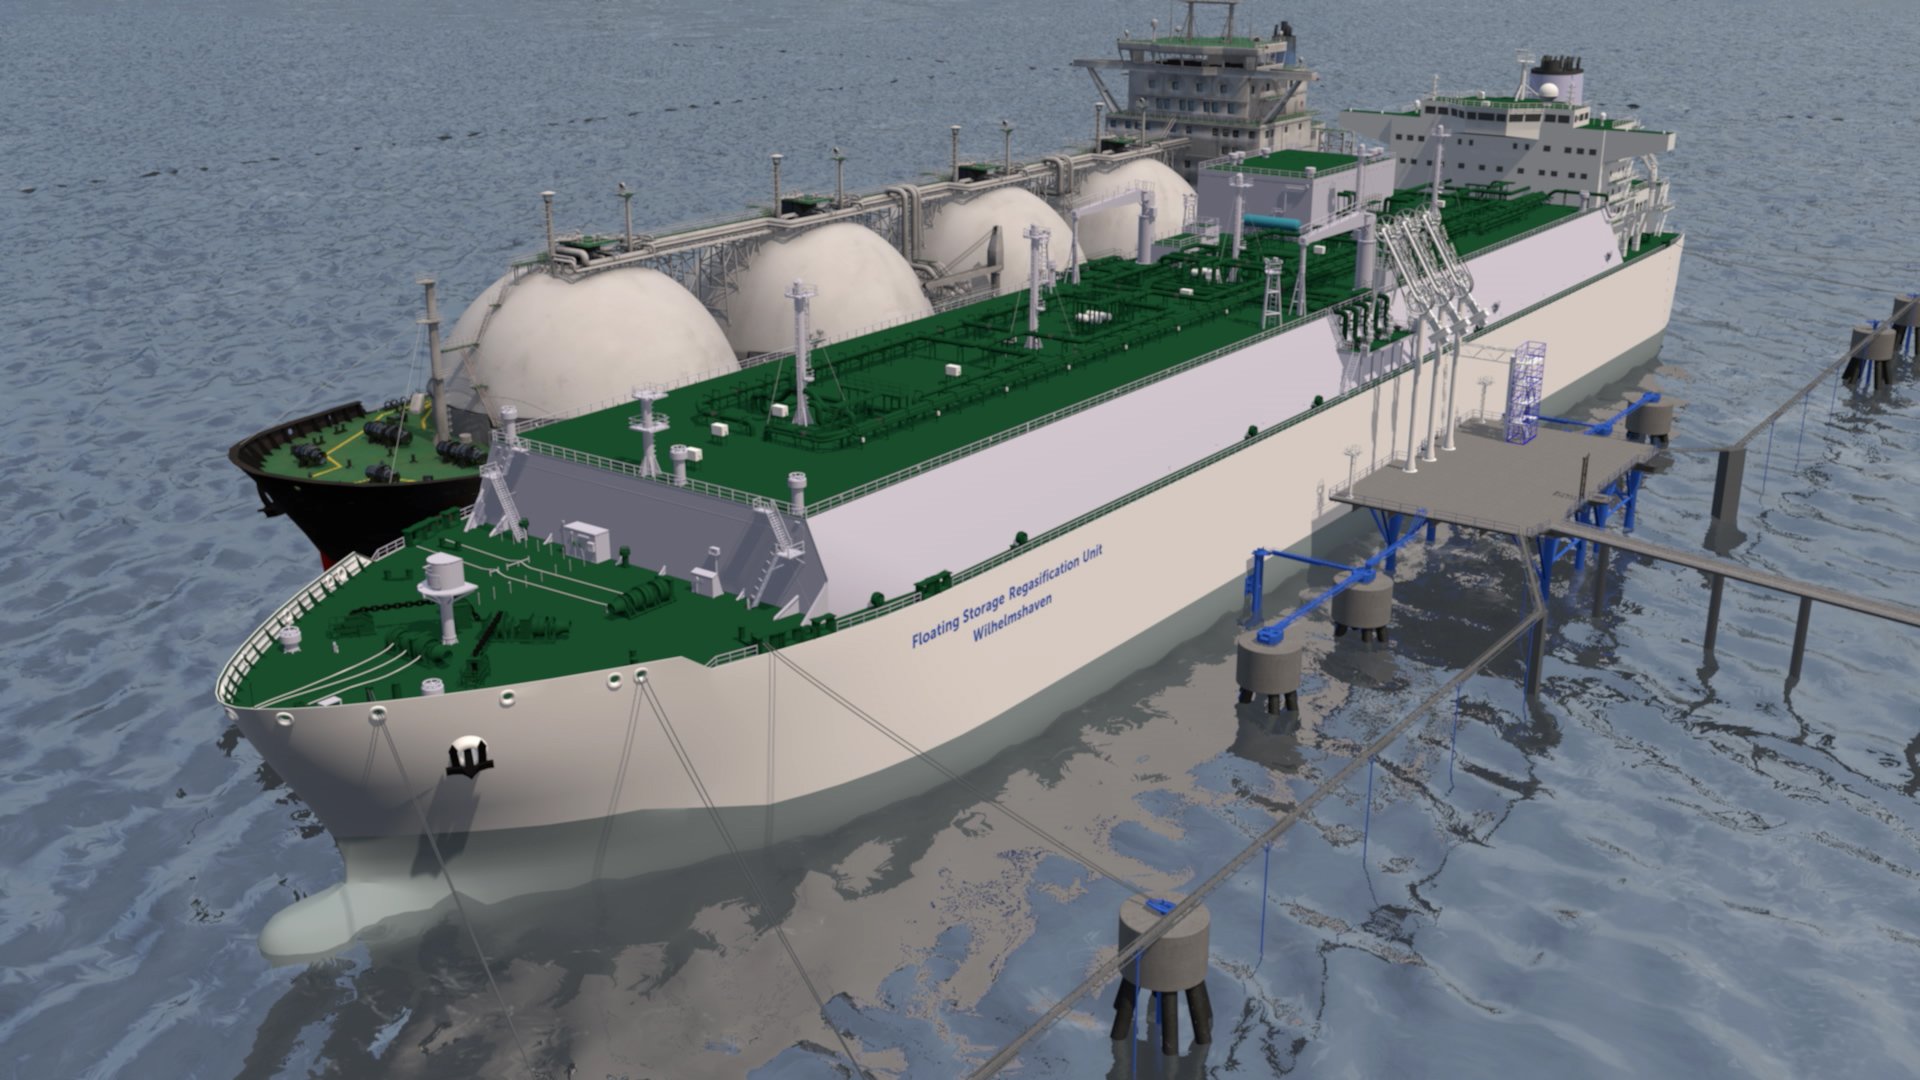 Uniper, Titan join forces on advancing use of LNG as fuel